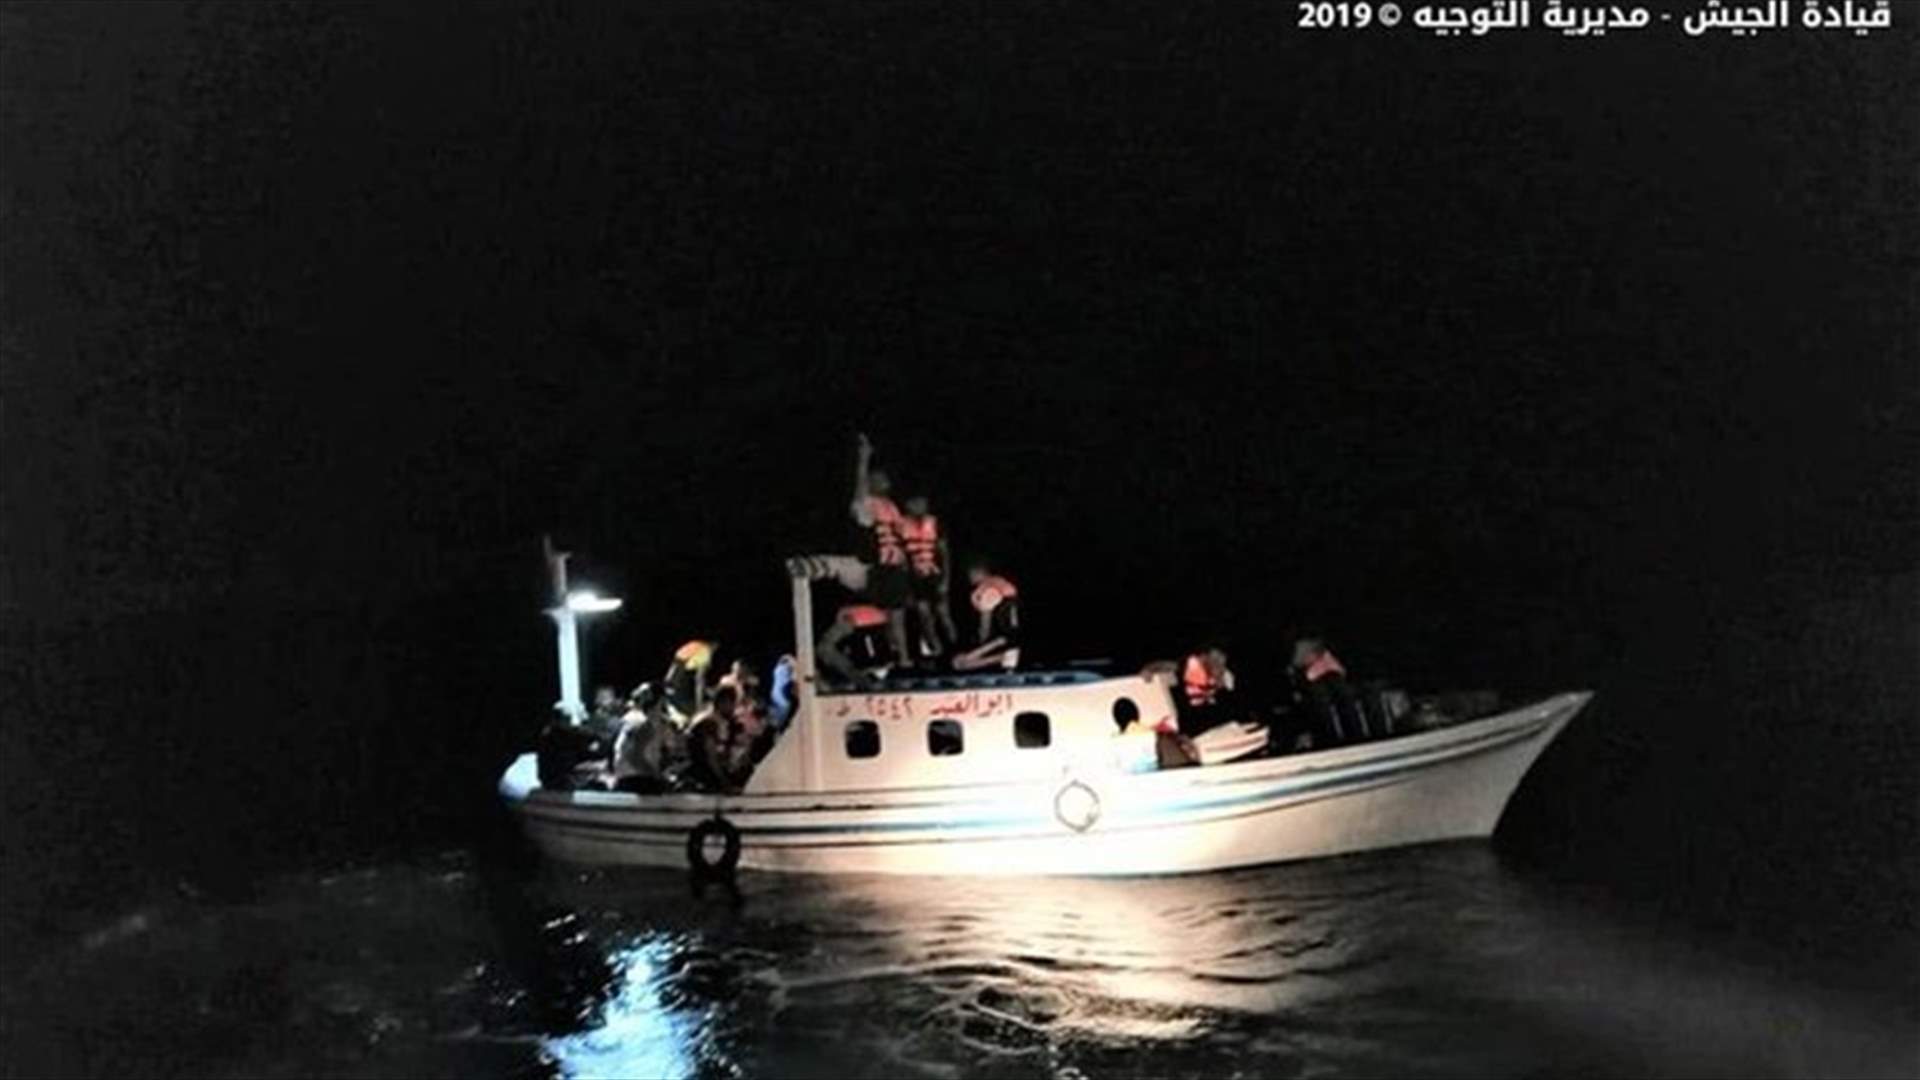 Army intercepts boat attempting to illegally leave Lebanon